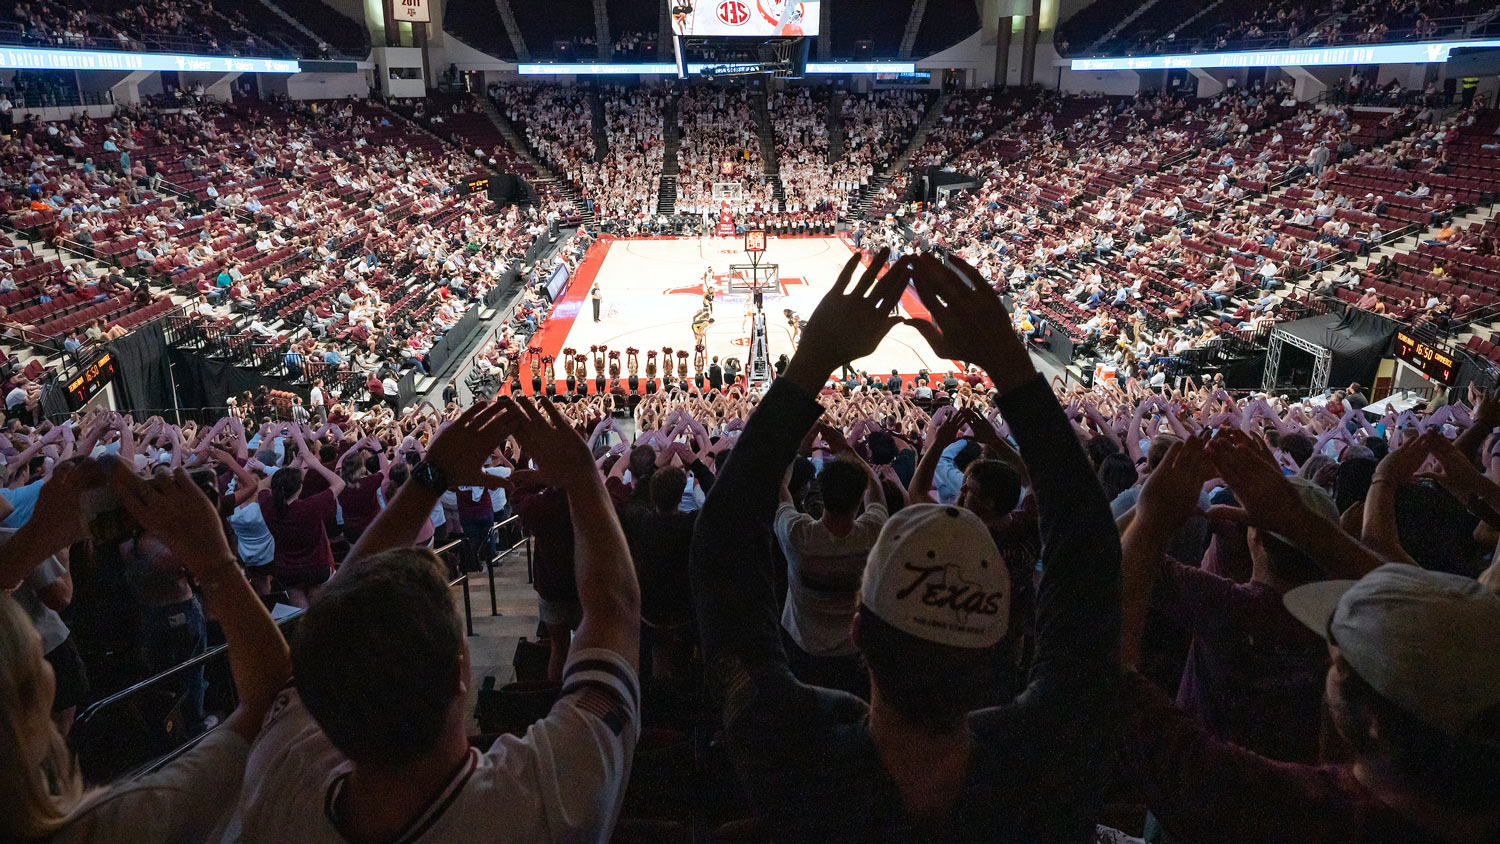 View of a Texas A&M basketball game from the top of the stands behind cheering fans